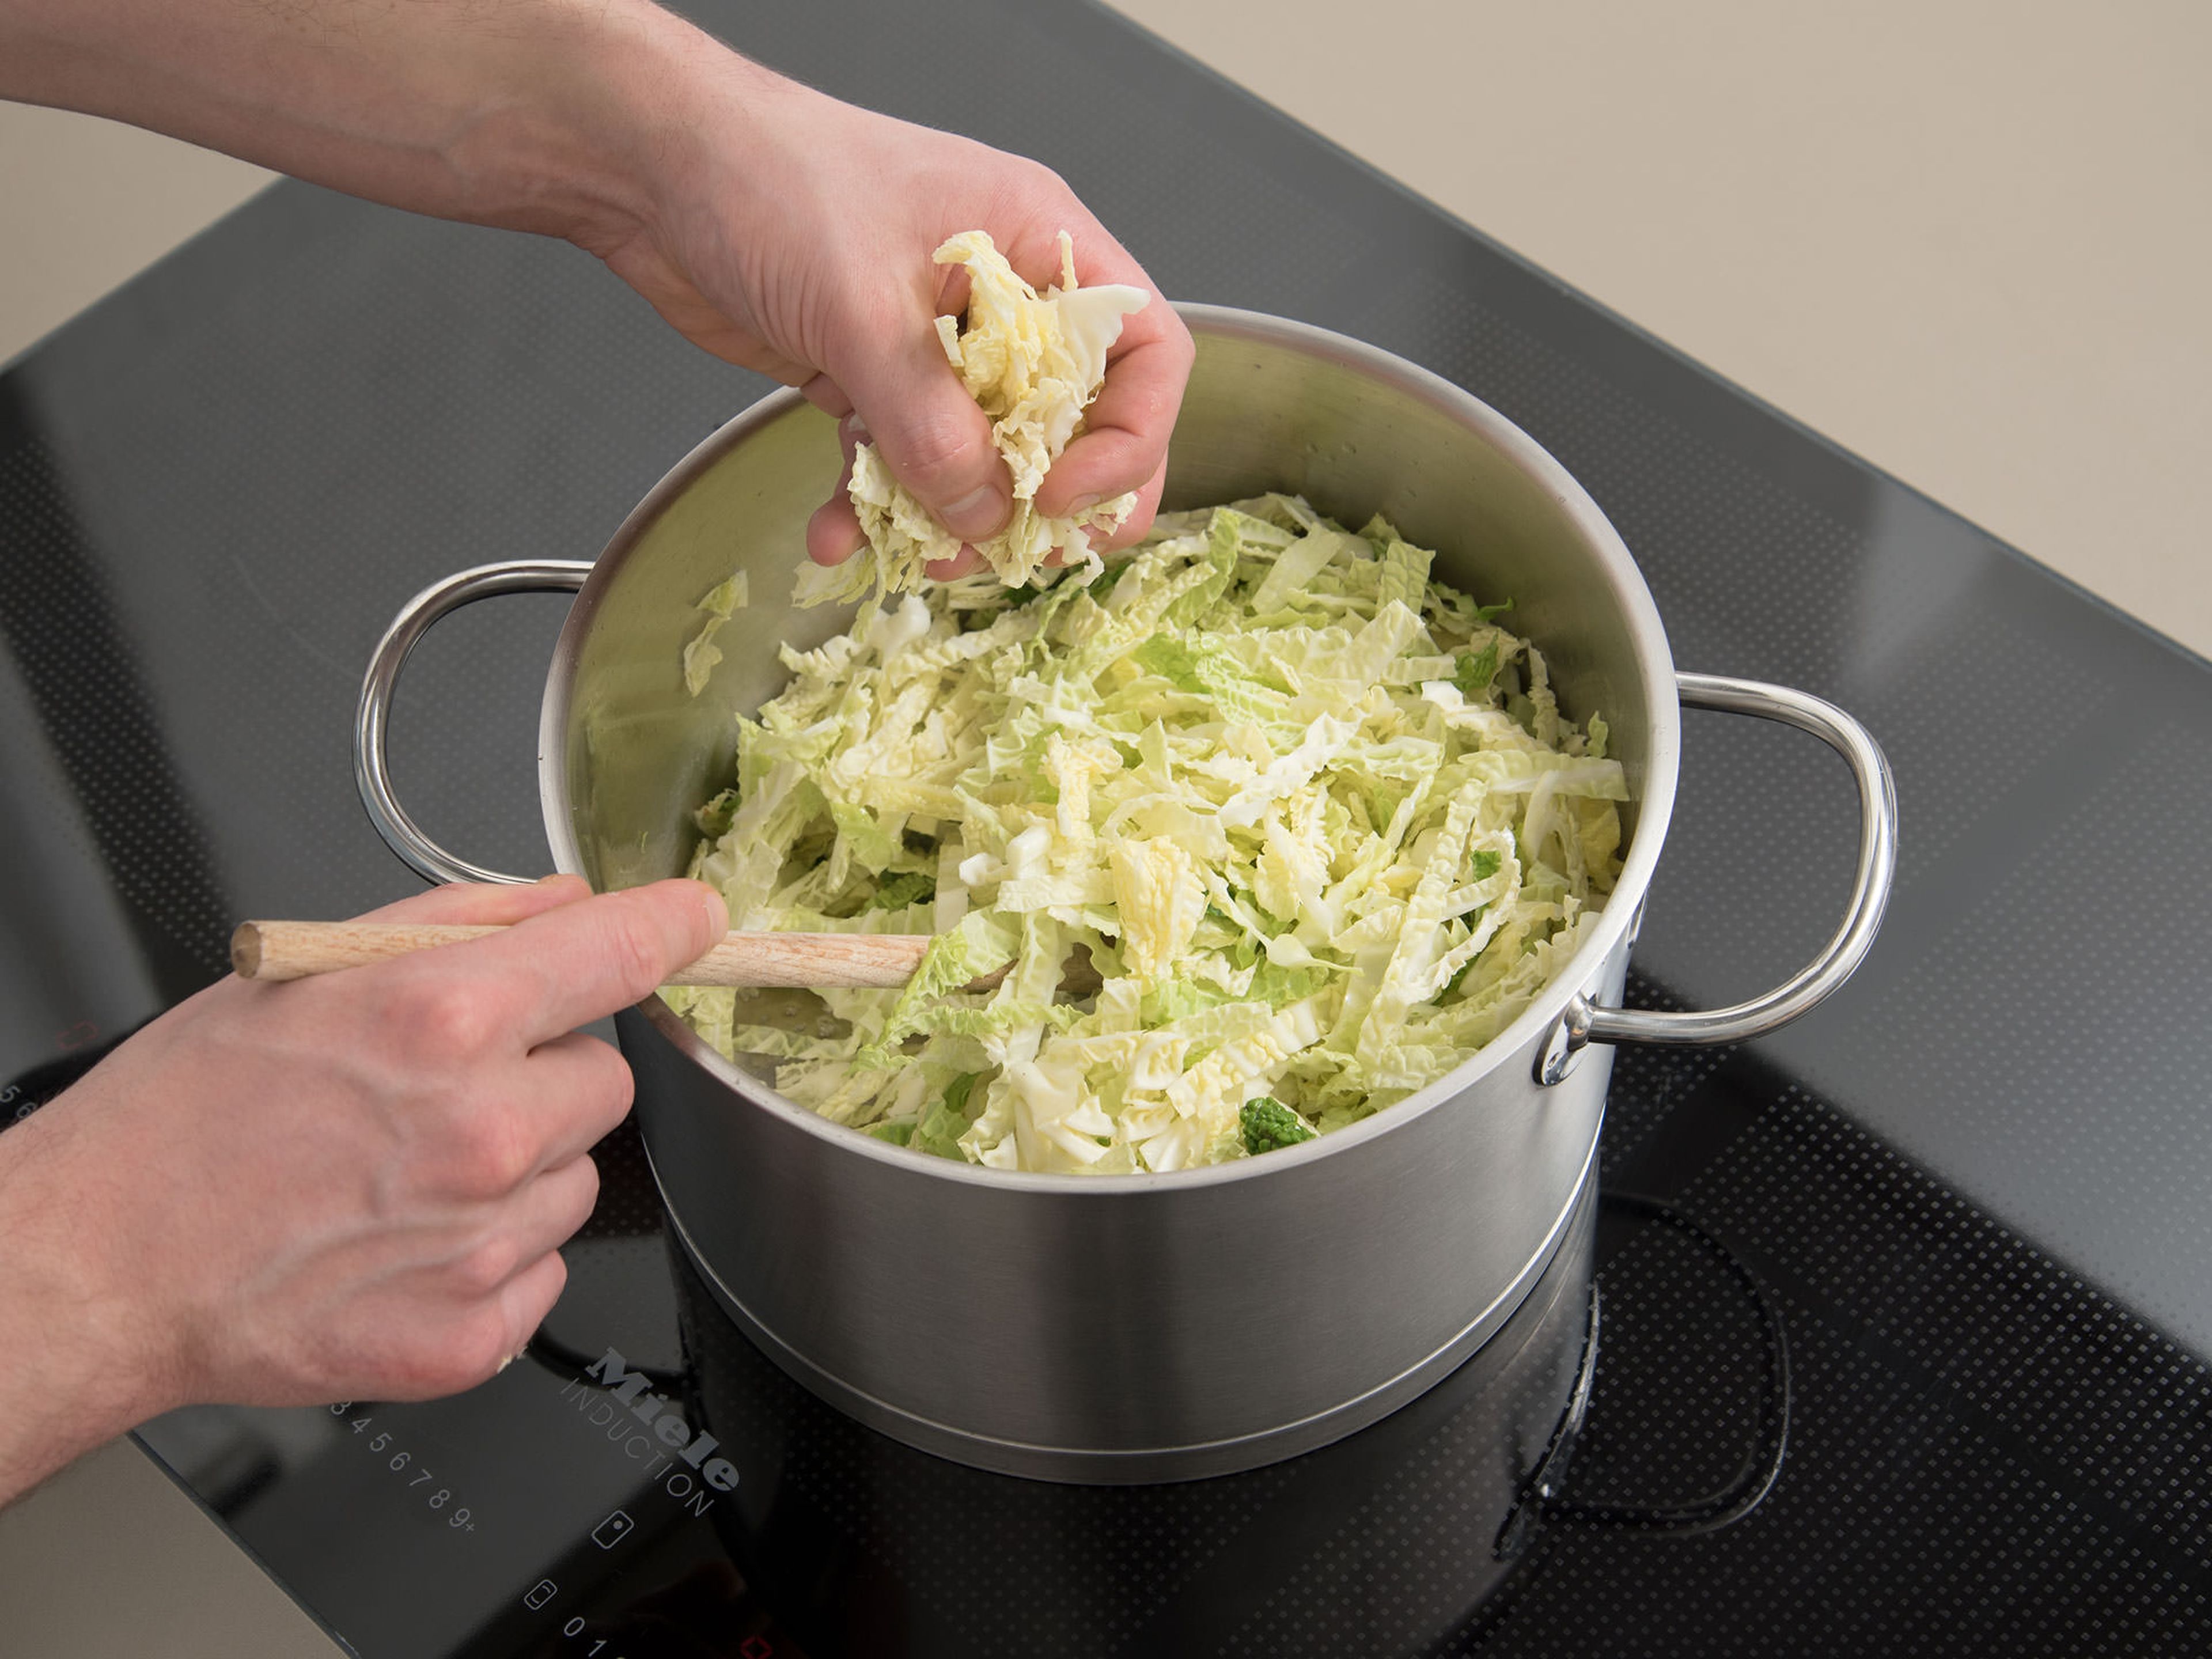 Sauté garlic with some oil in a large pot. Add cabbage, season with salt and pepper, and cook for approx. 10 min.